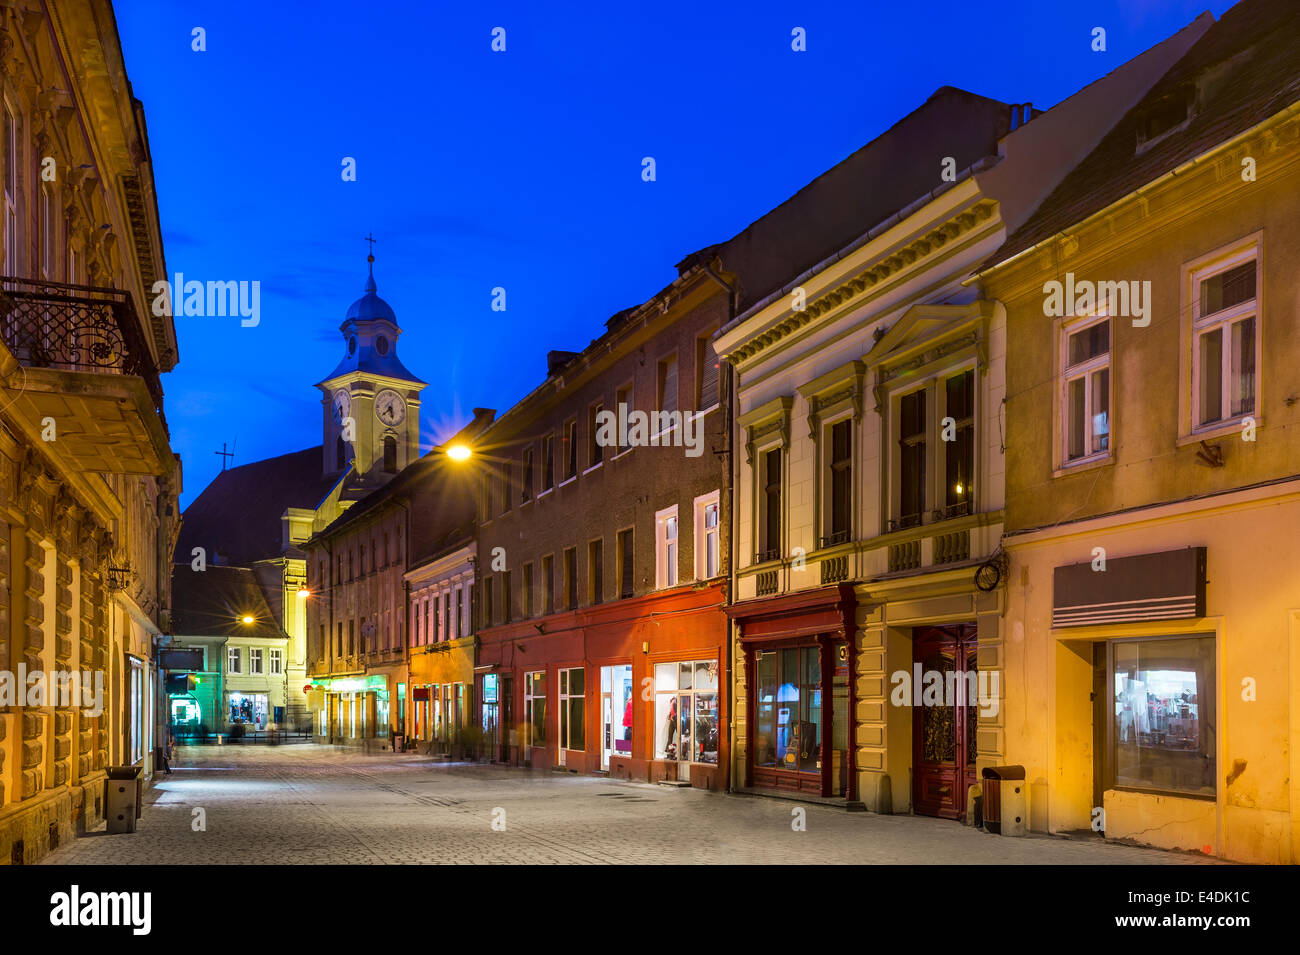 Brasov, Romania. Michael Weiss street in historical downtown of Brasov, main touristic city in Transylvania. Stock Photo